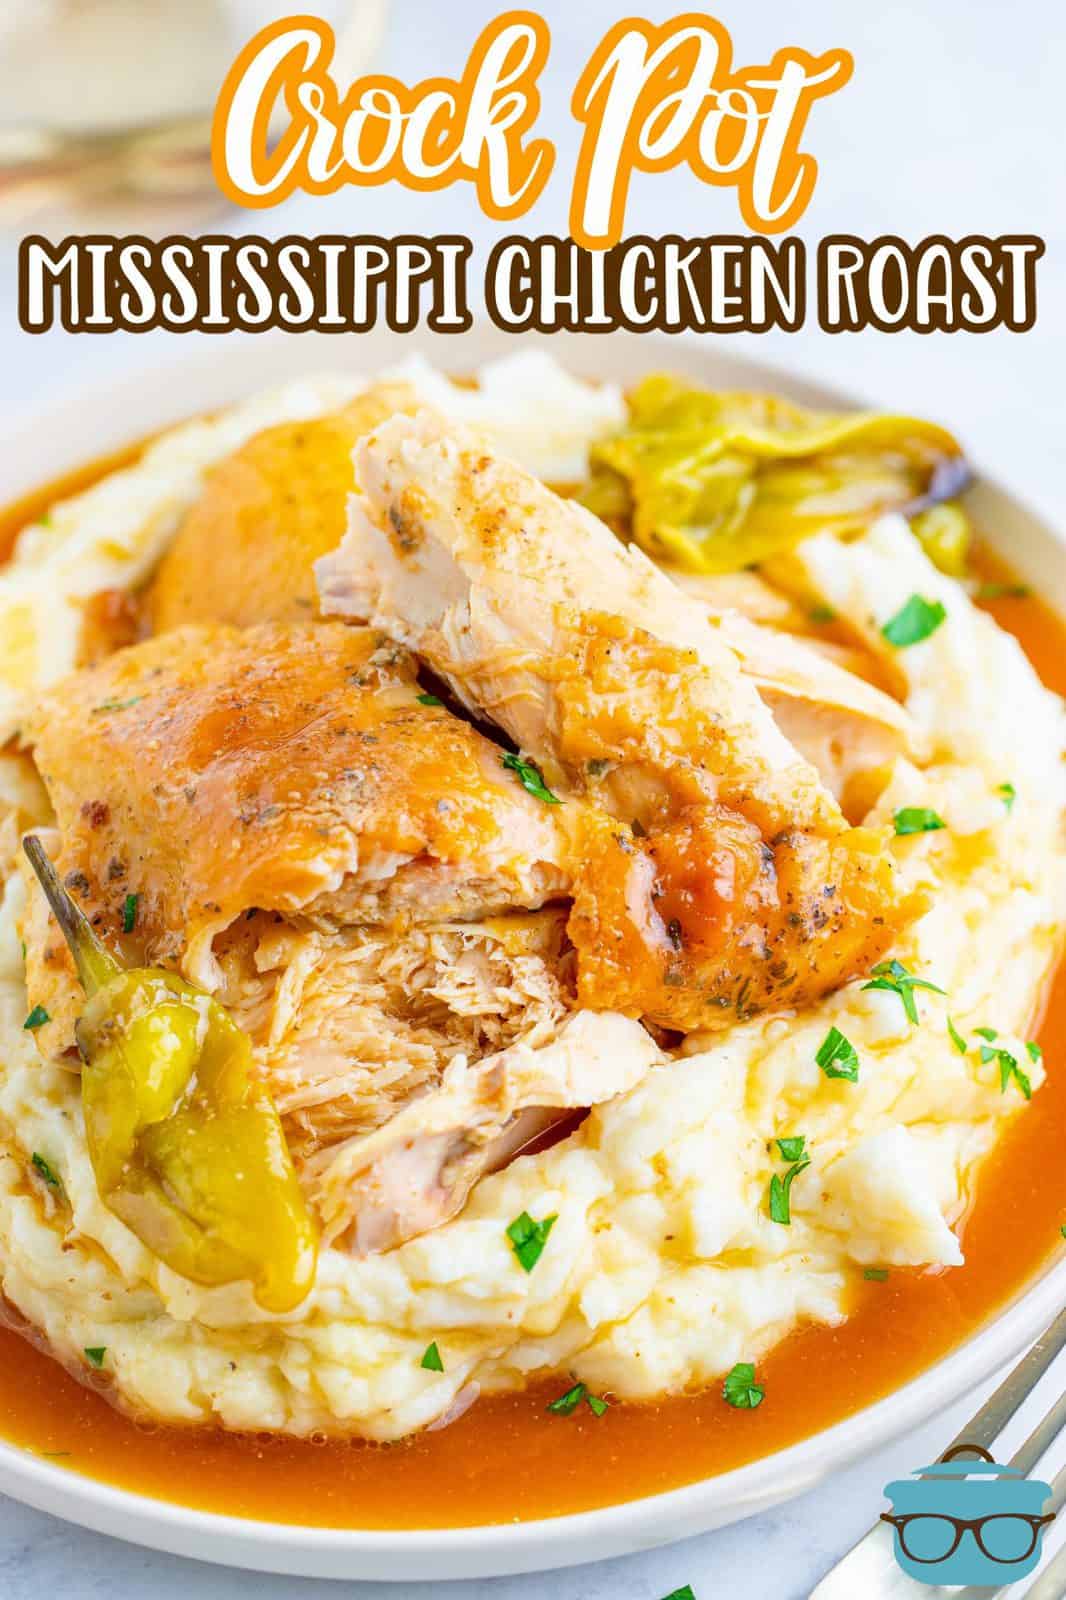 Crock Pot Mississippi Whole Roasted Chicken by The Country Cook - WEEKEND POTLUCK 494